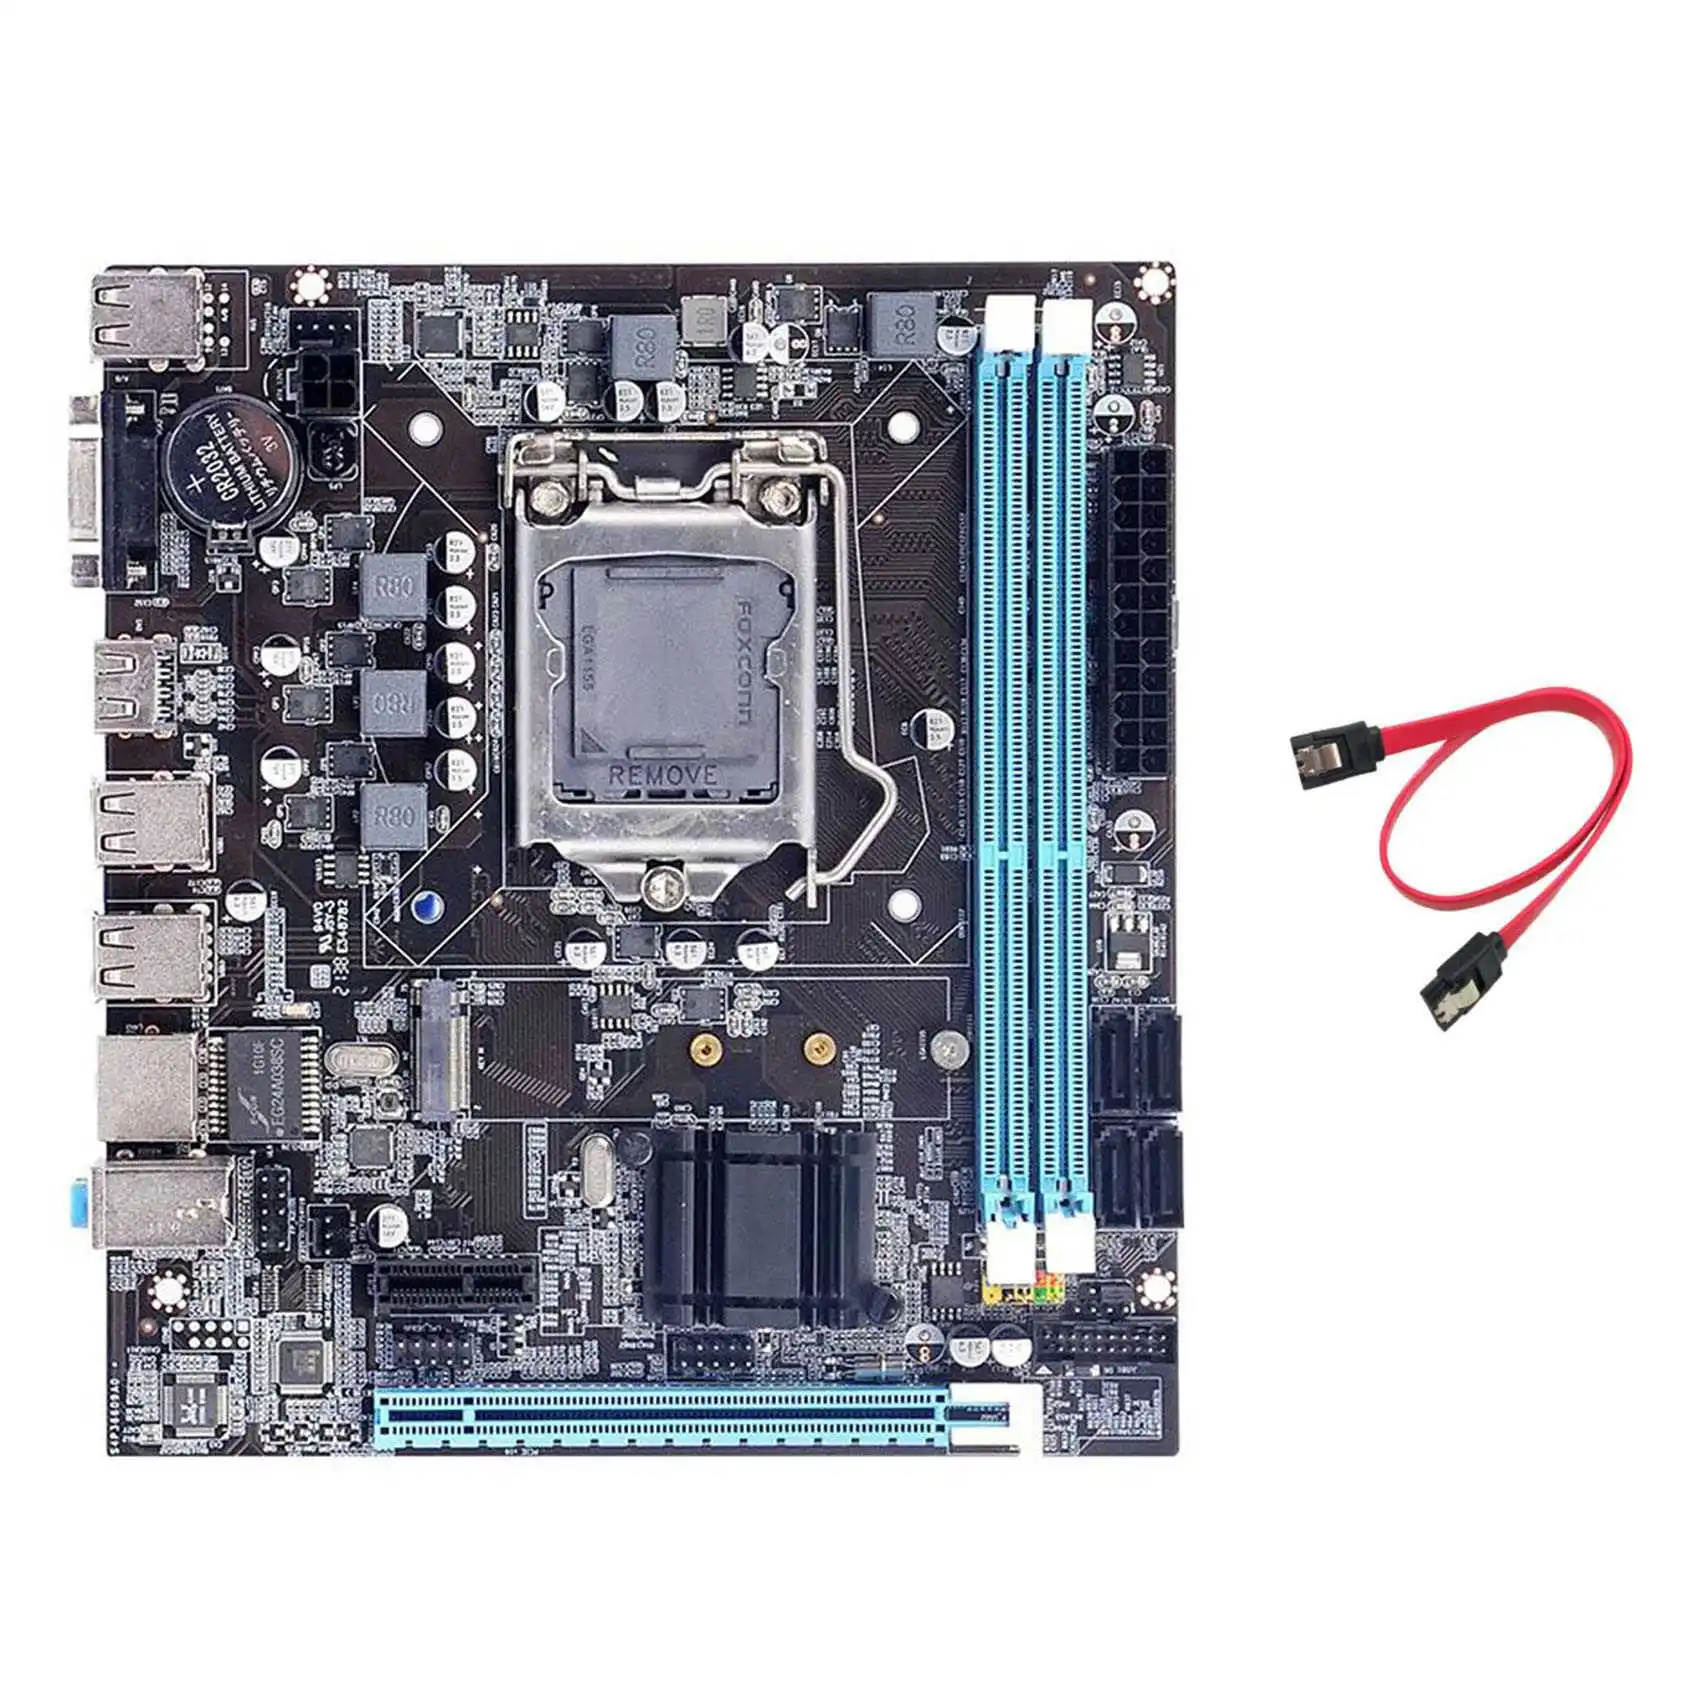 

H61 Motherboard+SATA Cable LGA1155 M.2 NVME Support 2XDDR3 RAM PCIE 16X for Office for PUBG CF LOL Gaming Motherboard